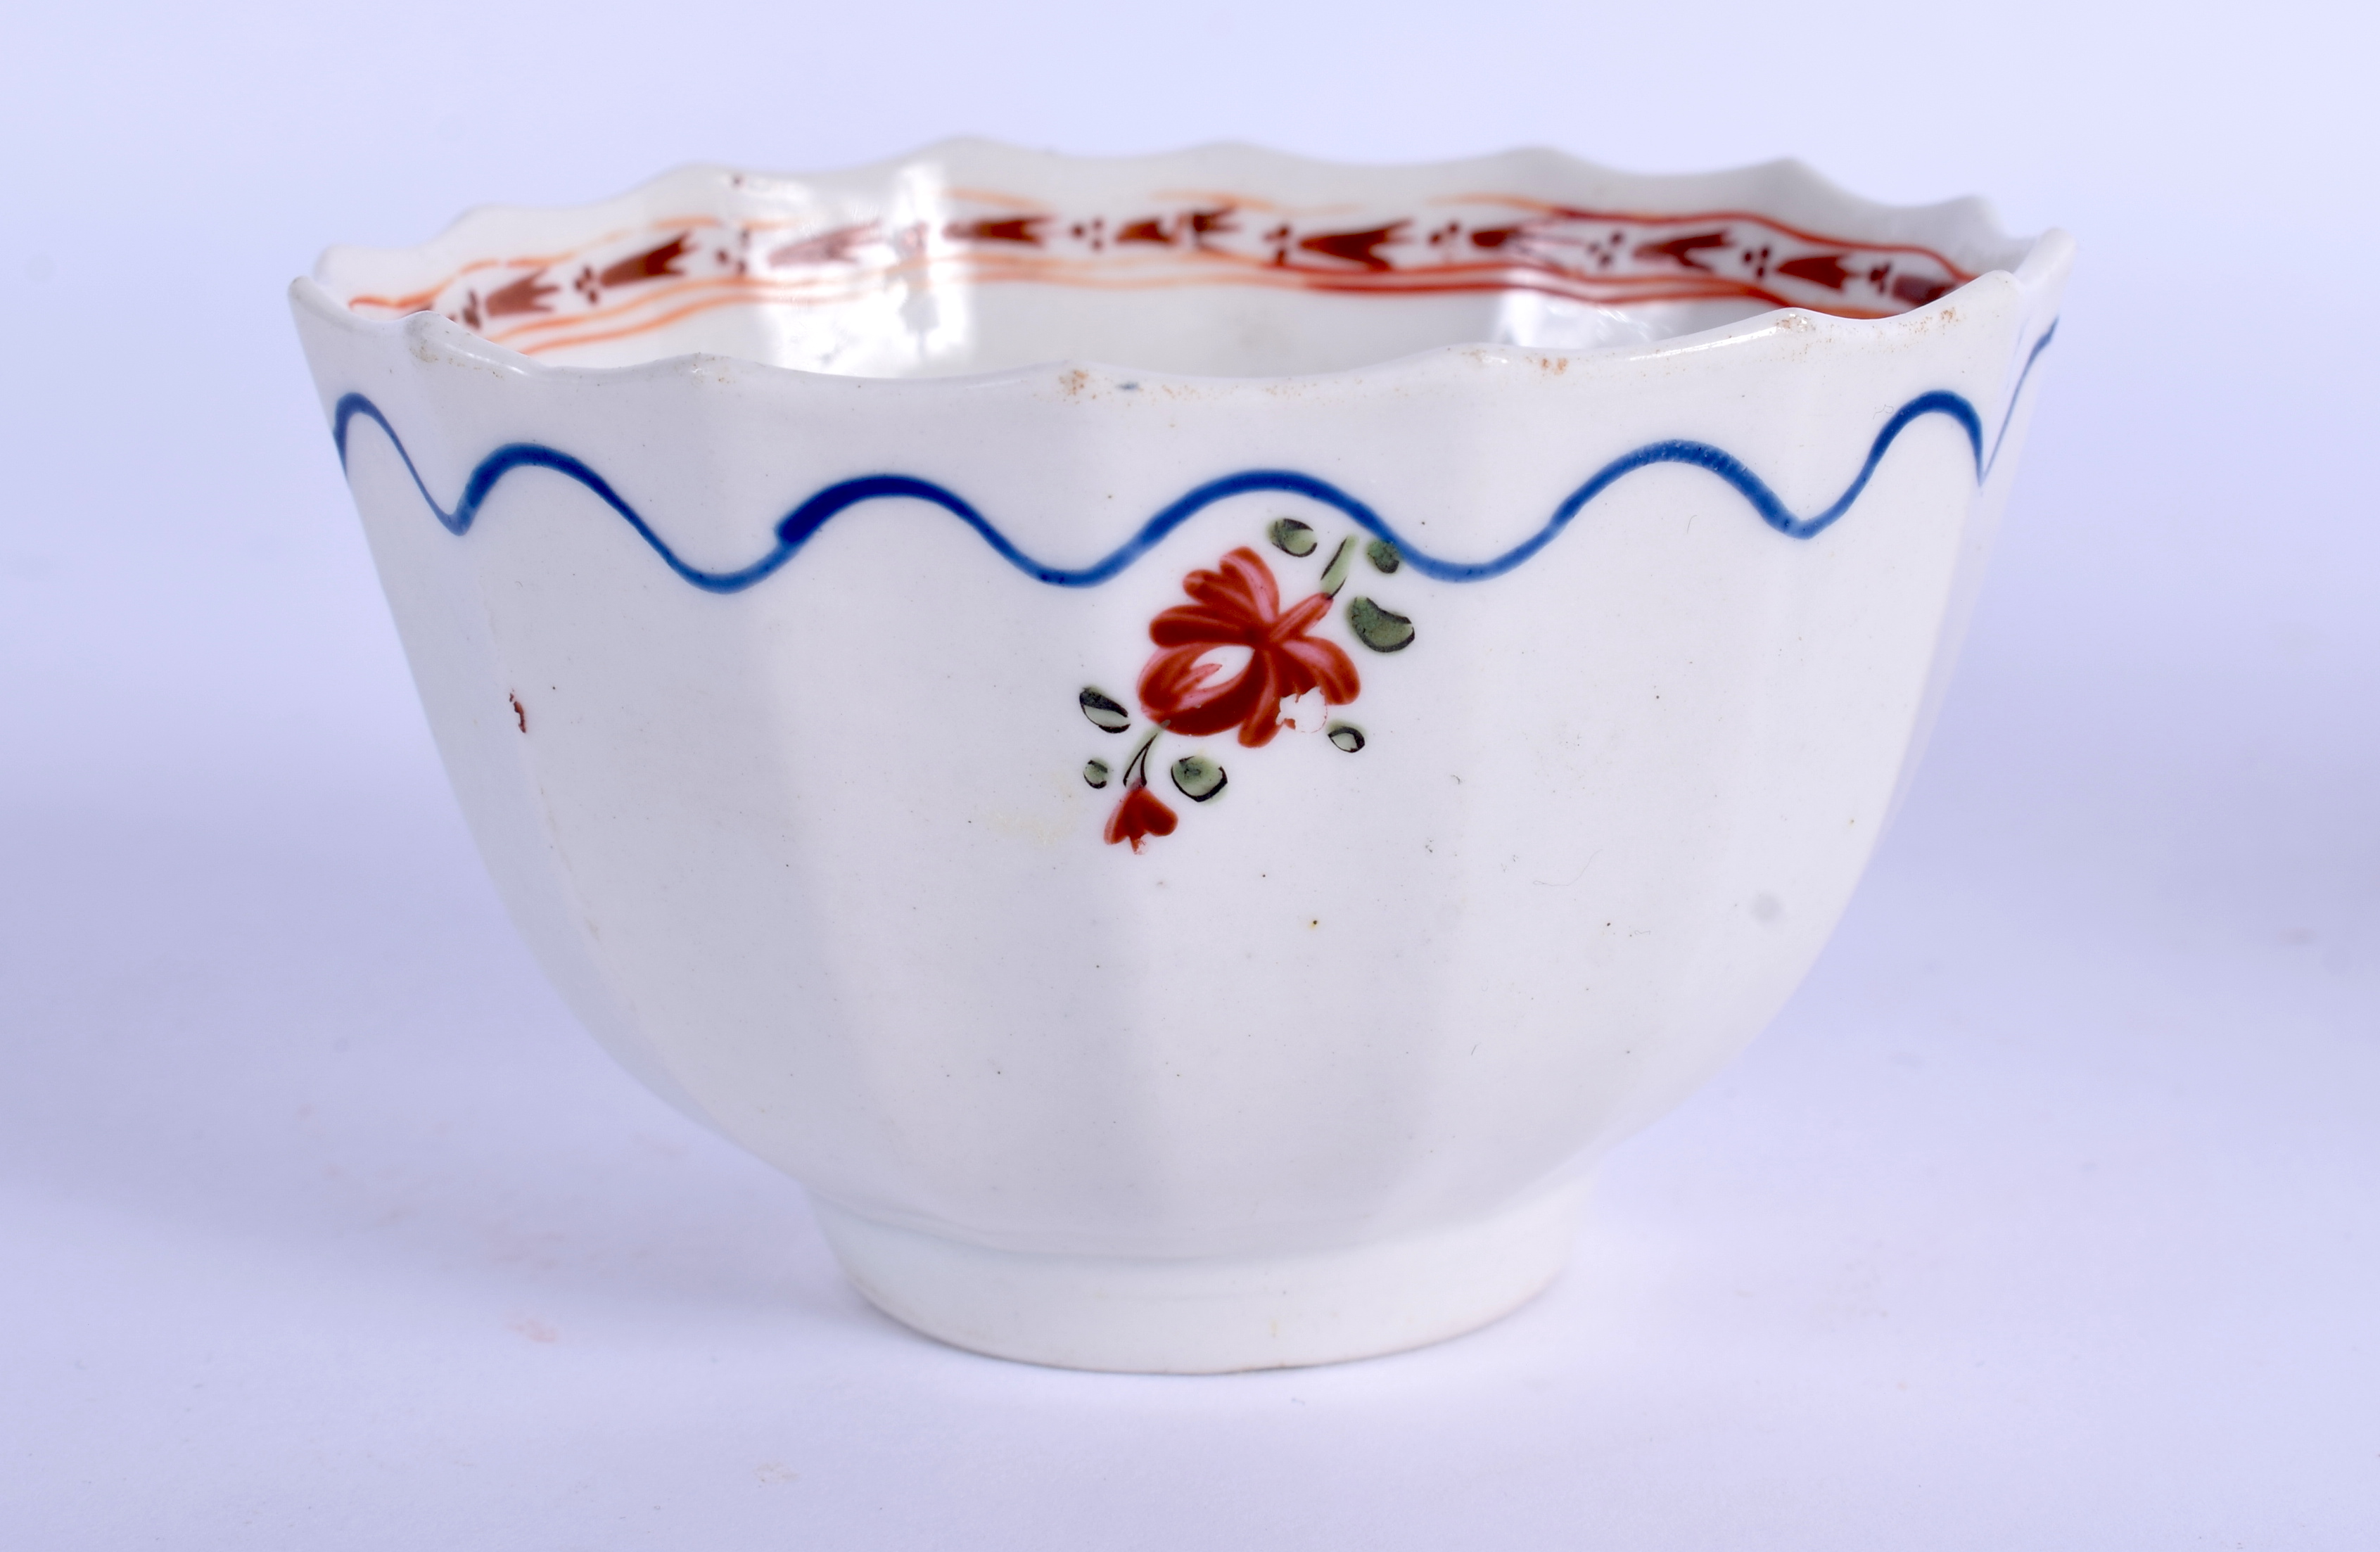 AN 18TH CENTURY LOWESTOFT TEABOWL AND SAUCER painted with central floral sprigs under an iron red bo - Image 2 of 3